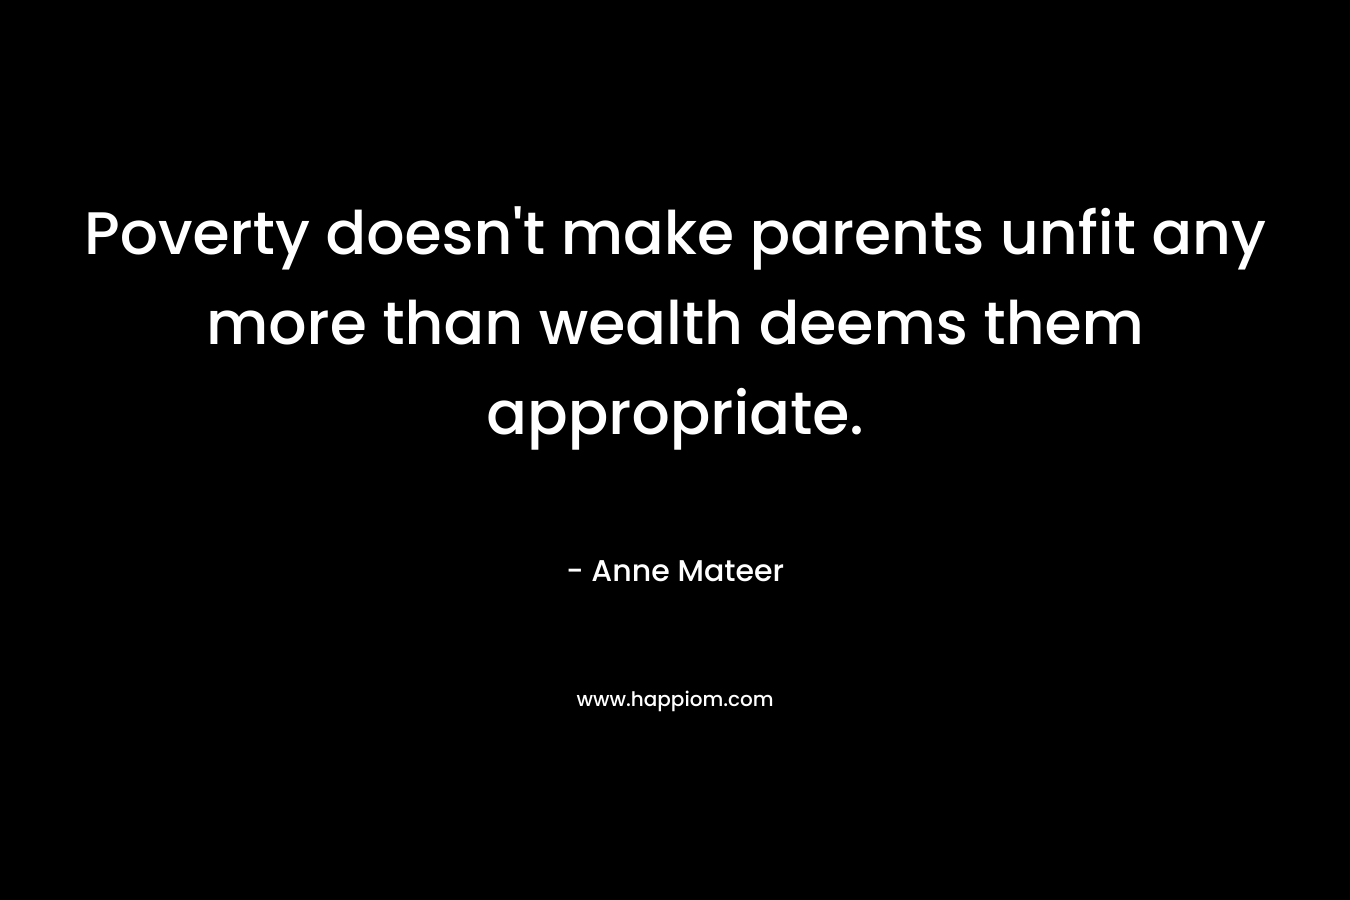 Poverty doesn't make parents unfit any more than wealth deems them appropriate.